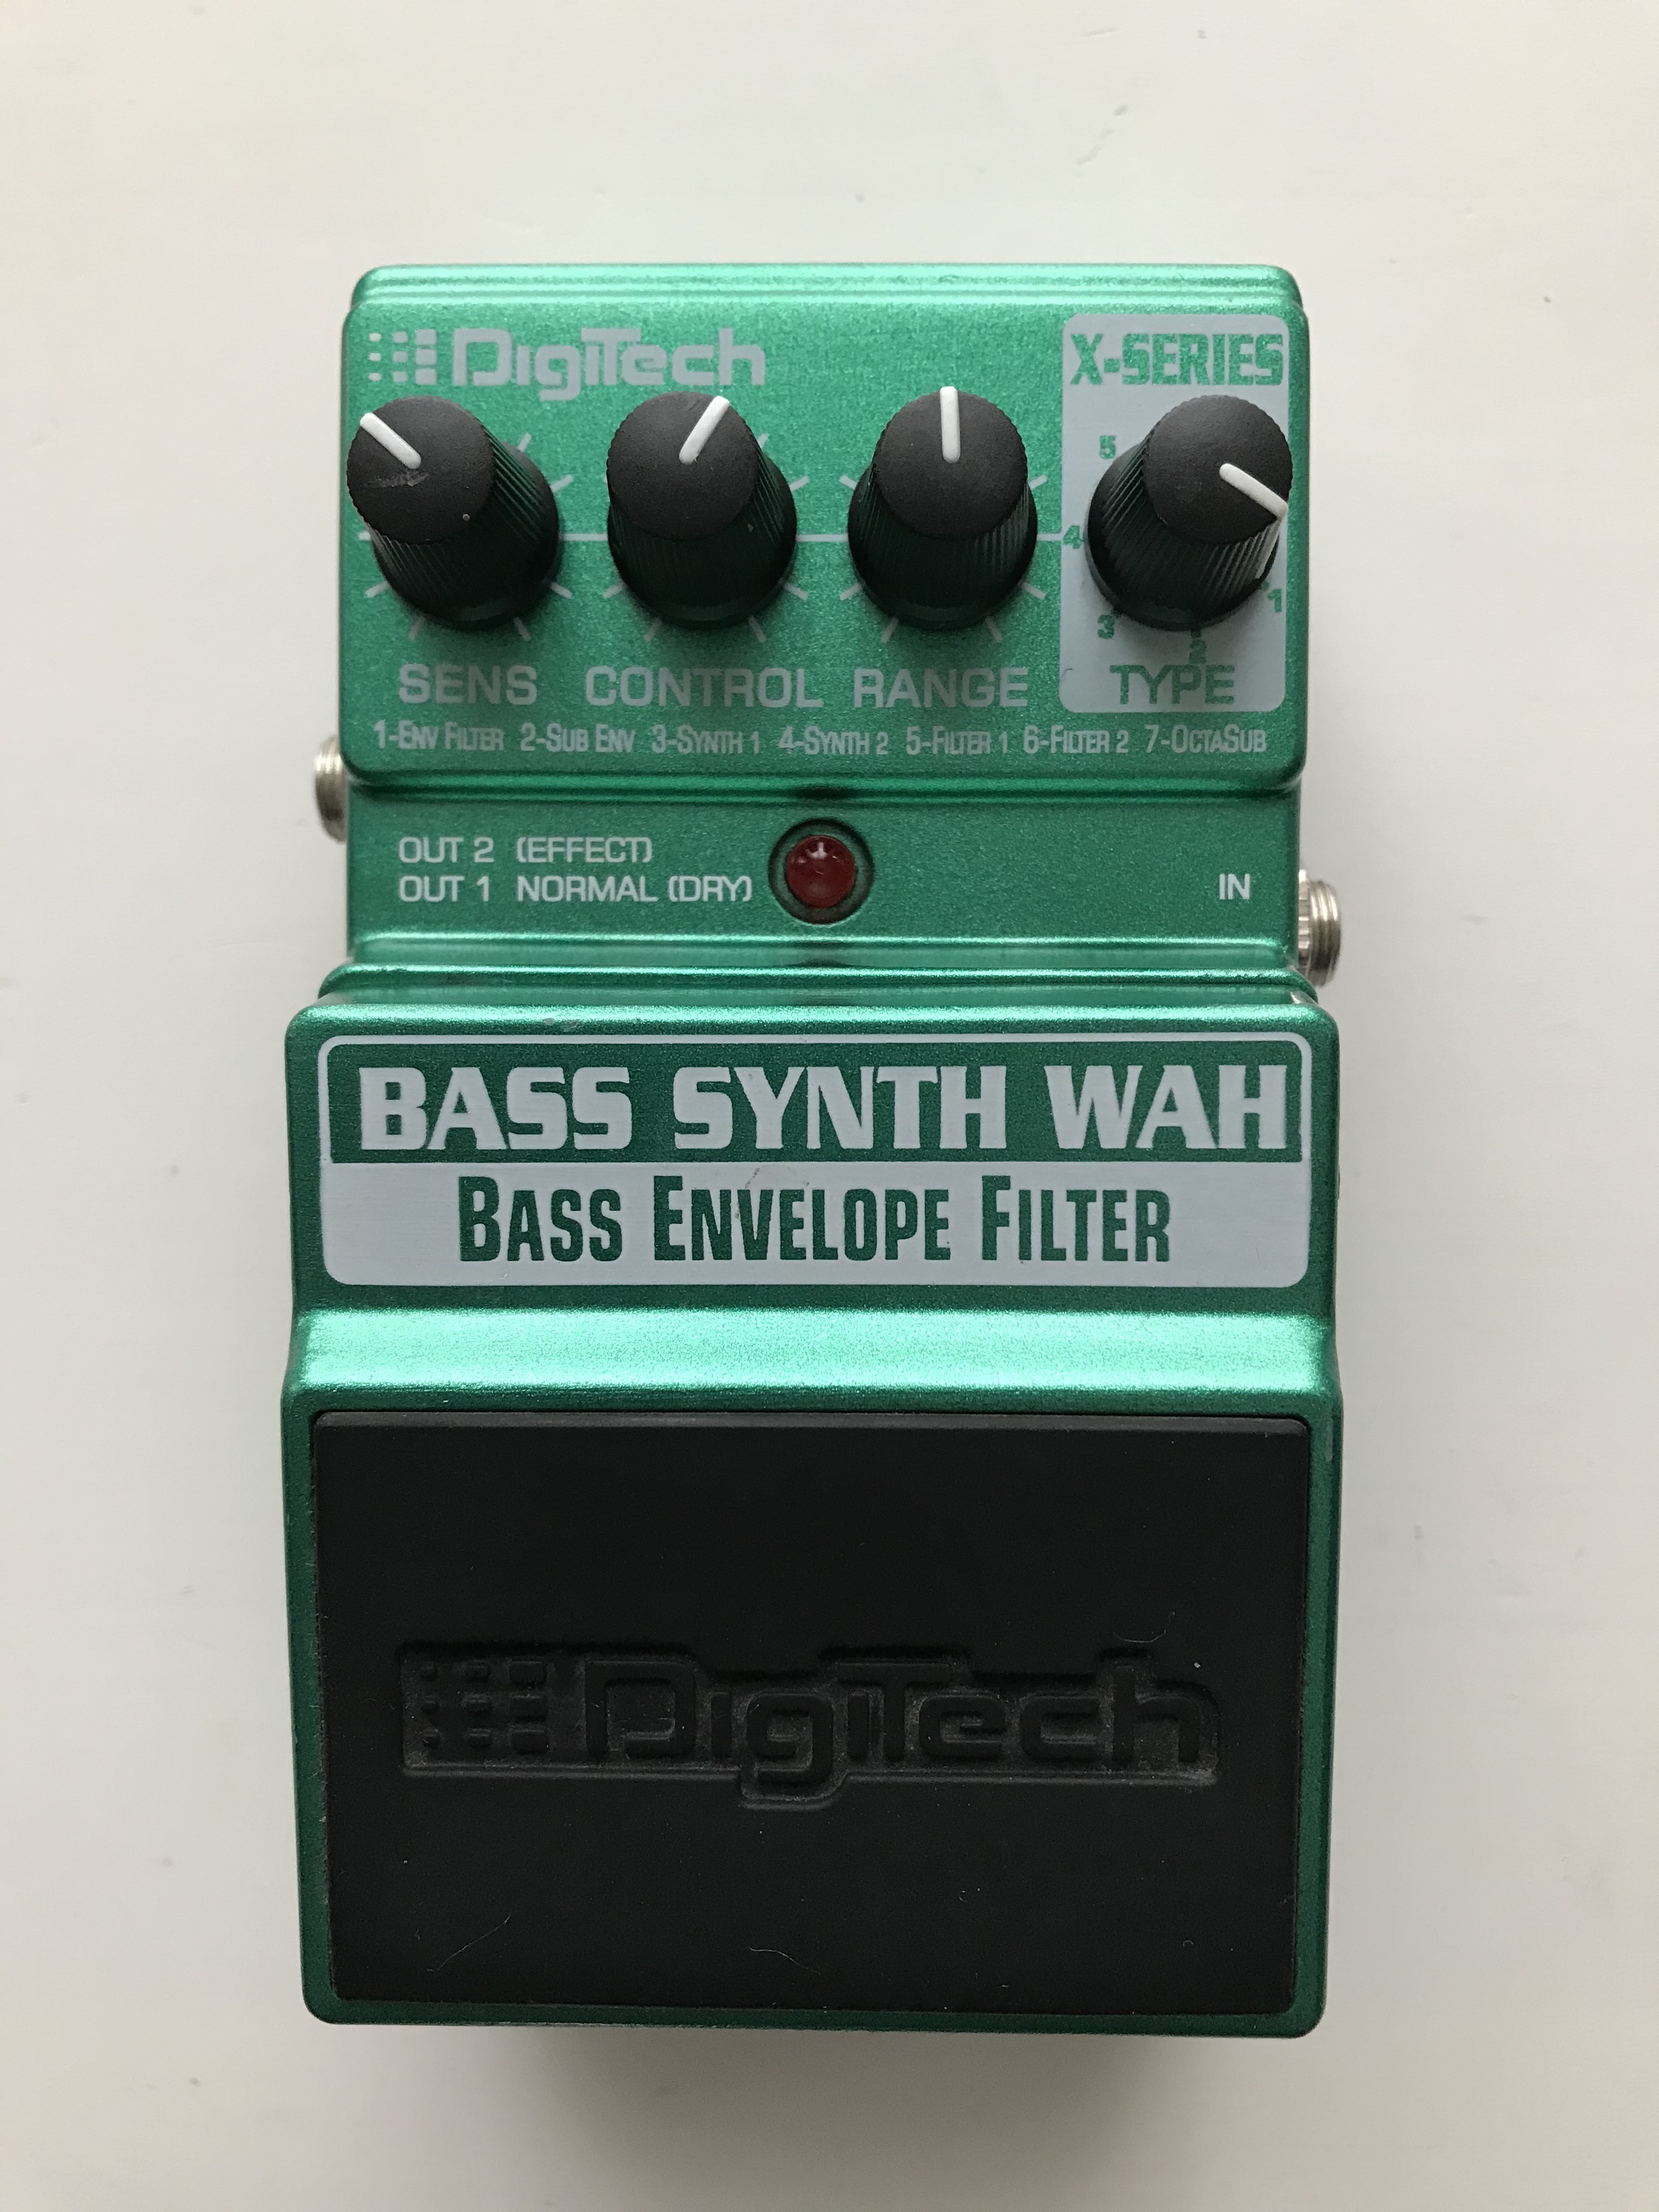 Bass synth